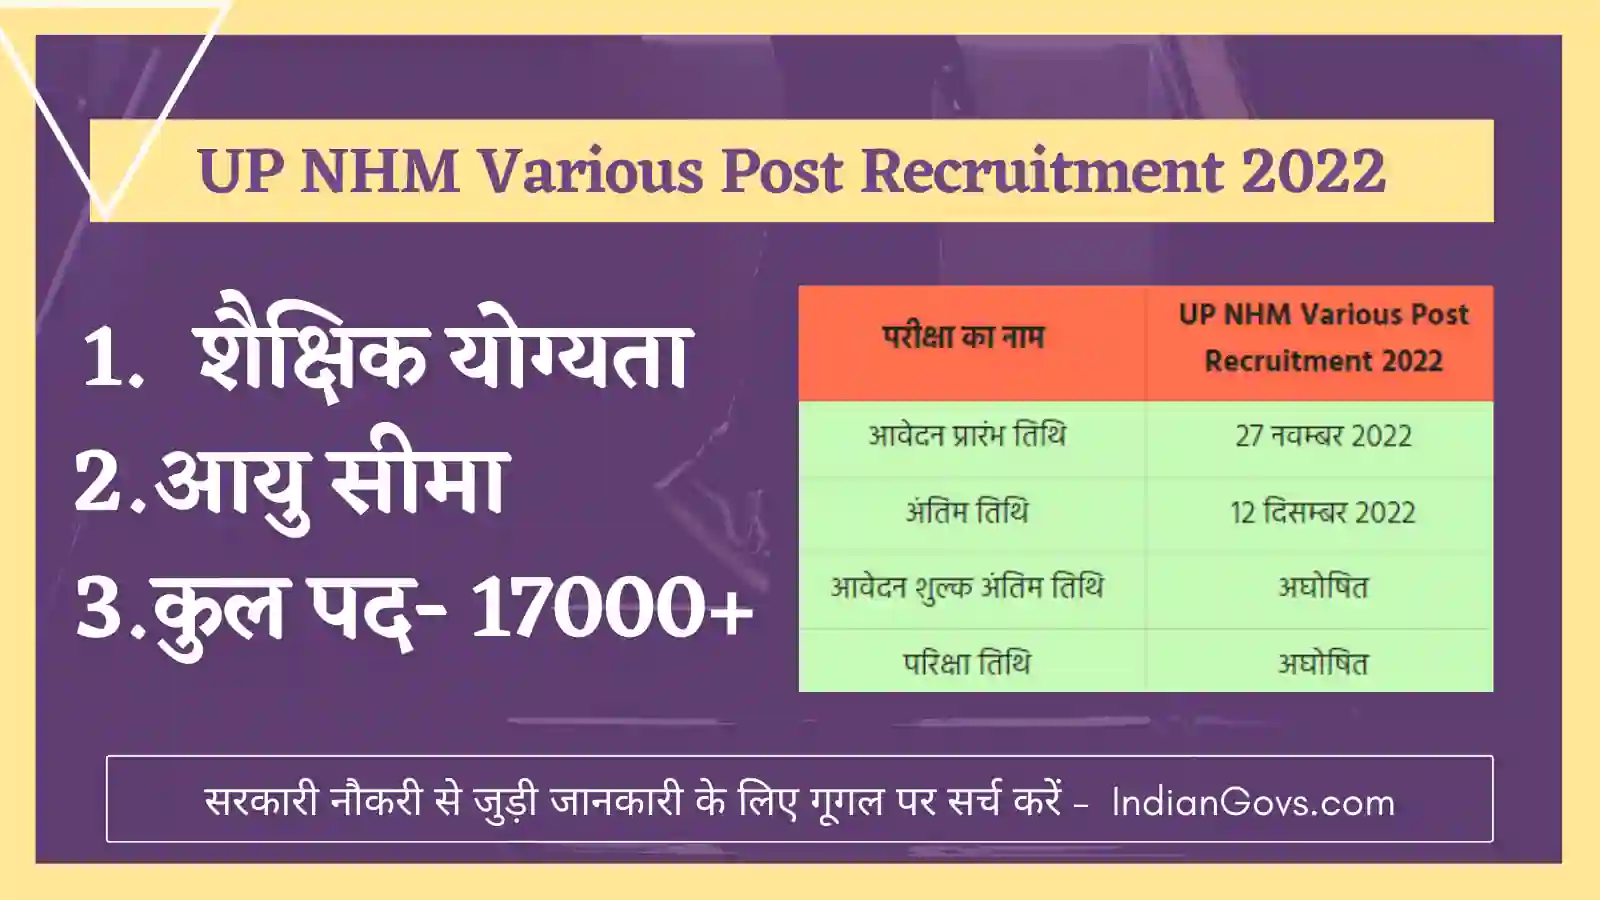 UP NHM Various Post Recruitment 2022 in hindi